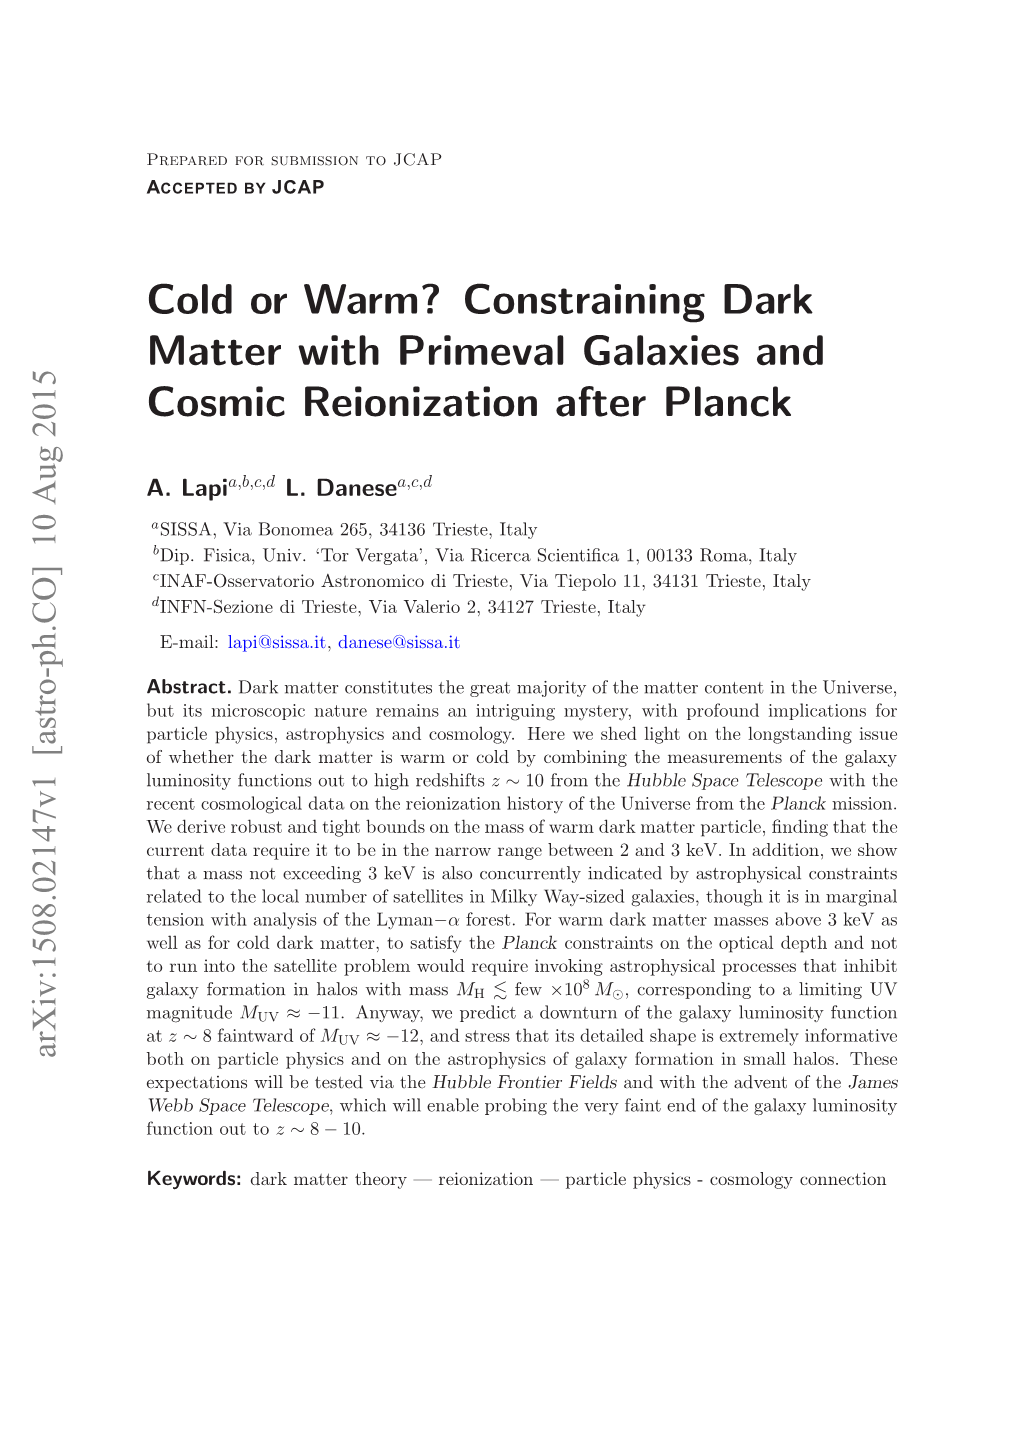 Constraining Dark Matter with Primeval Galaxies and Cosmic Reionization After Planck